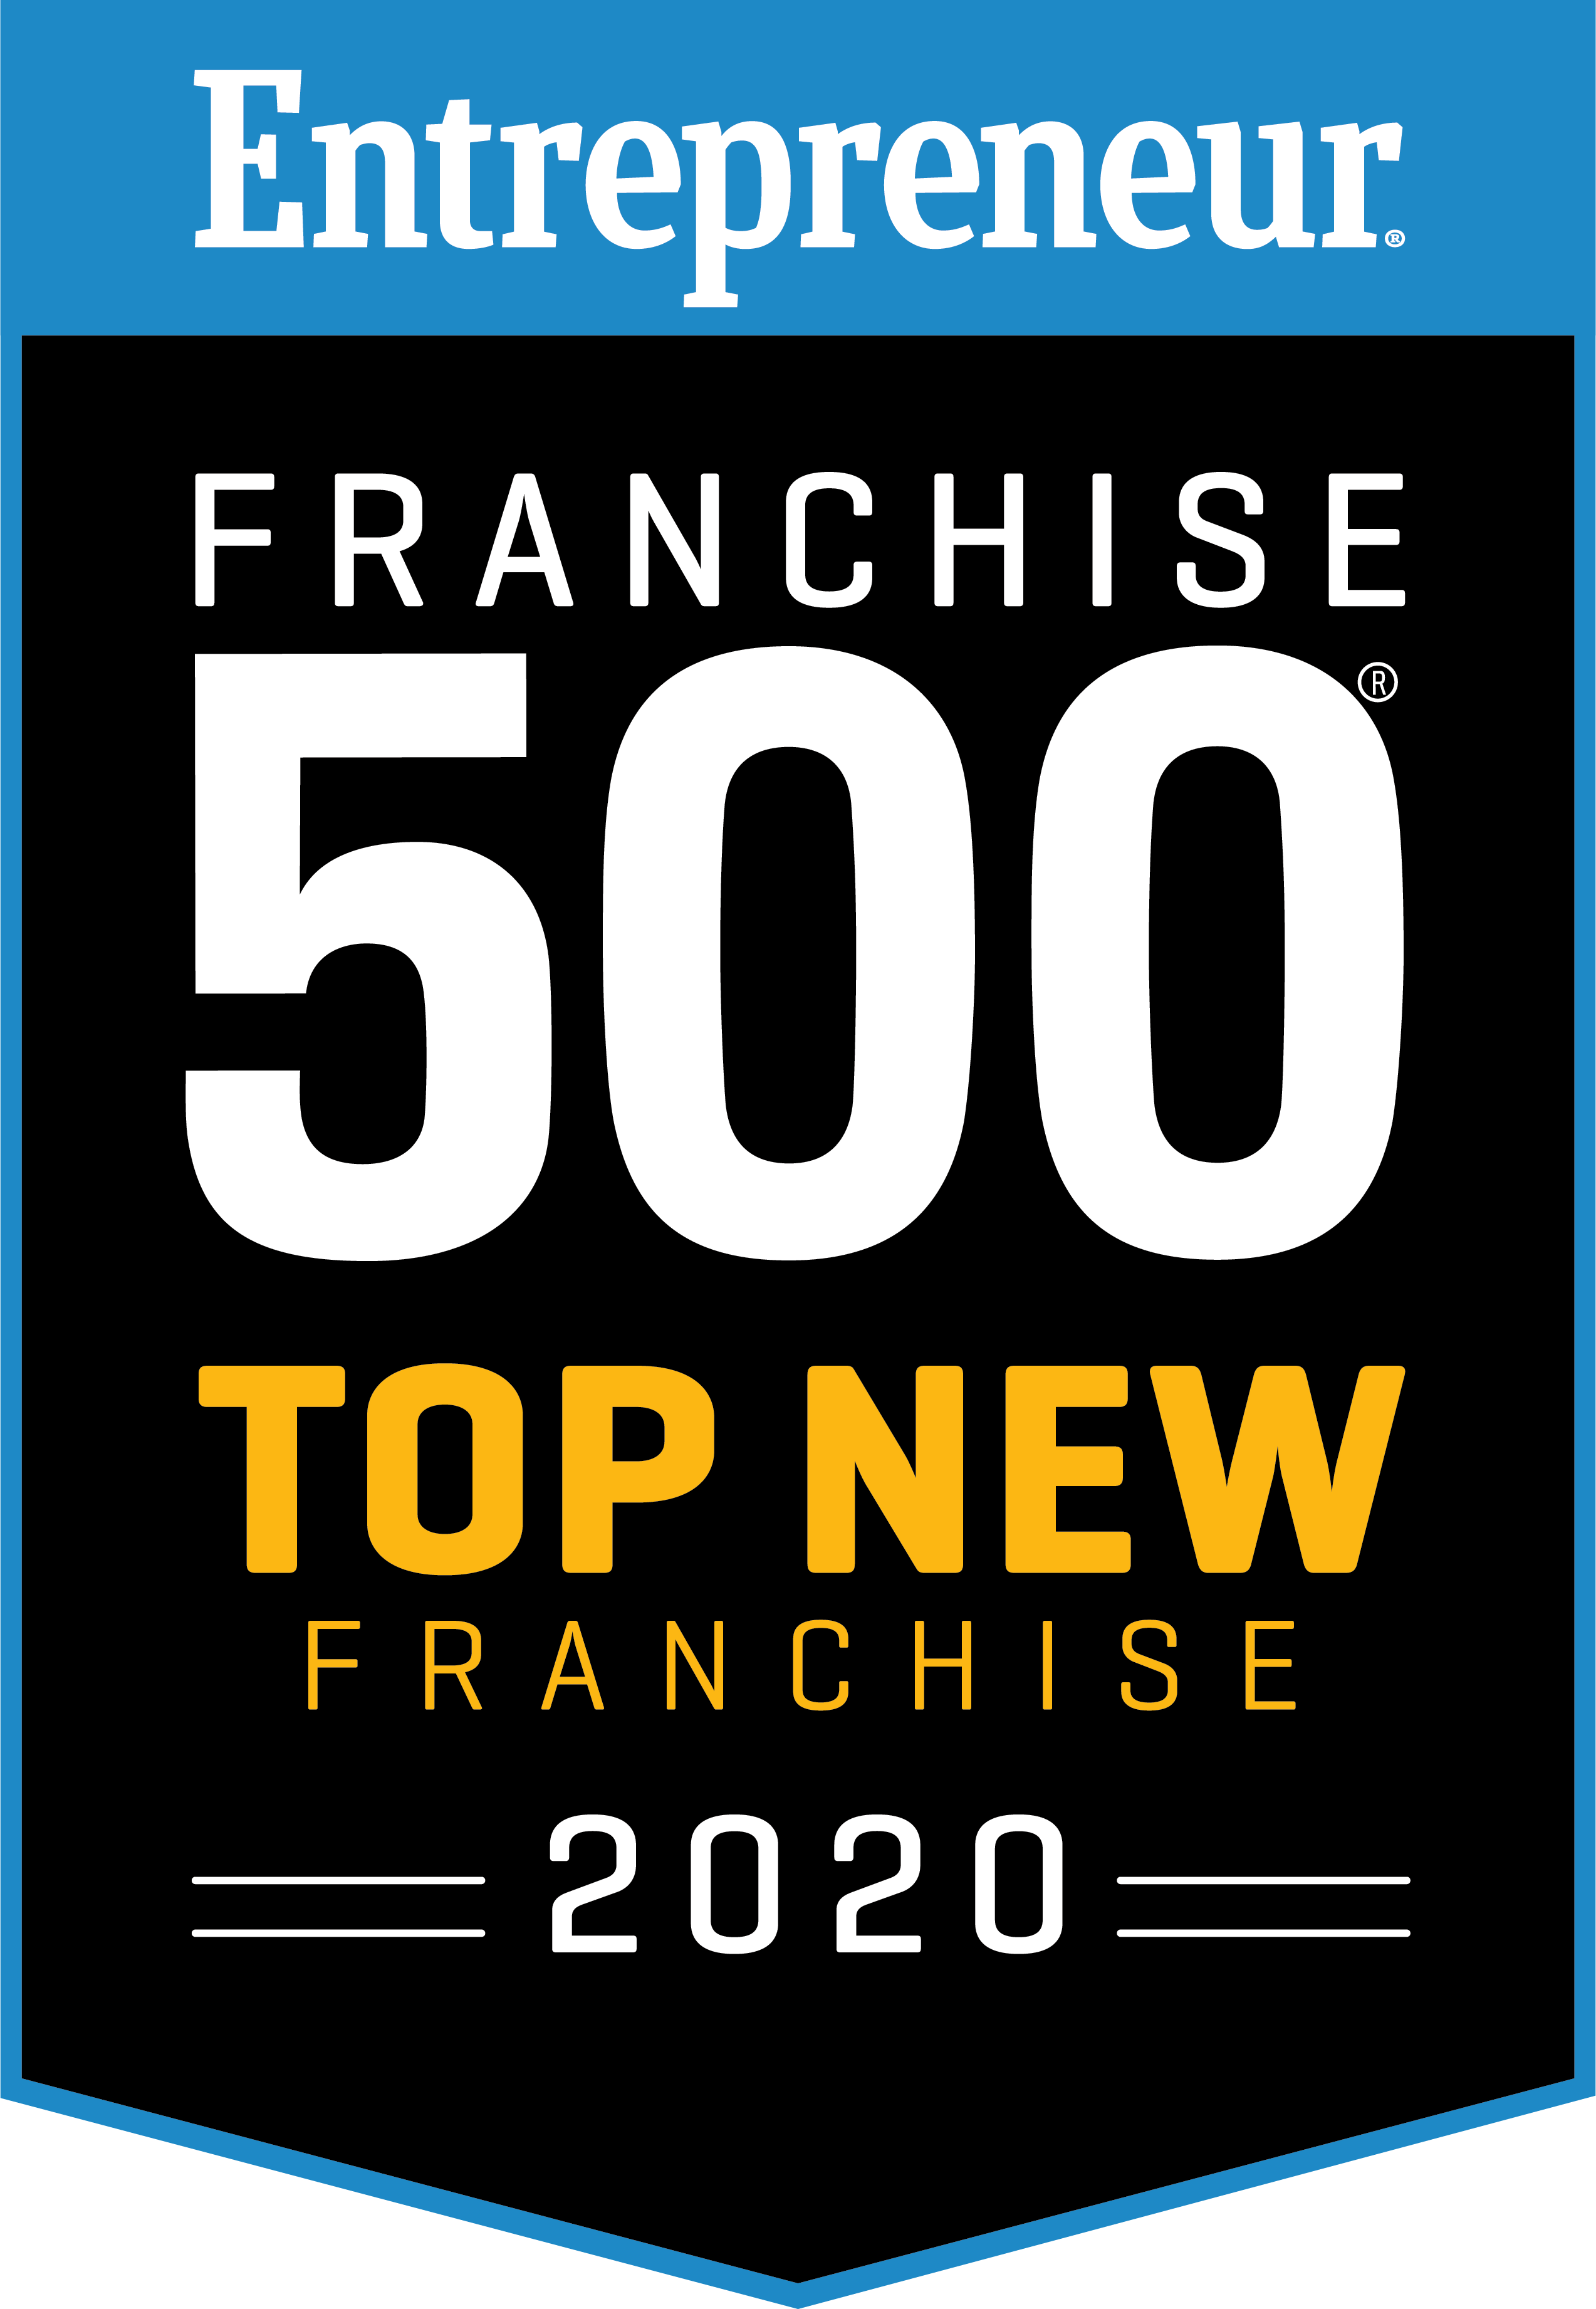 Top New Franchise Badge 2020